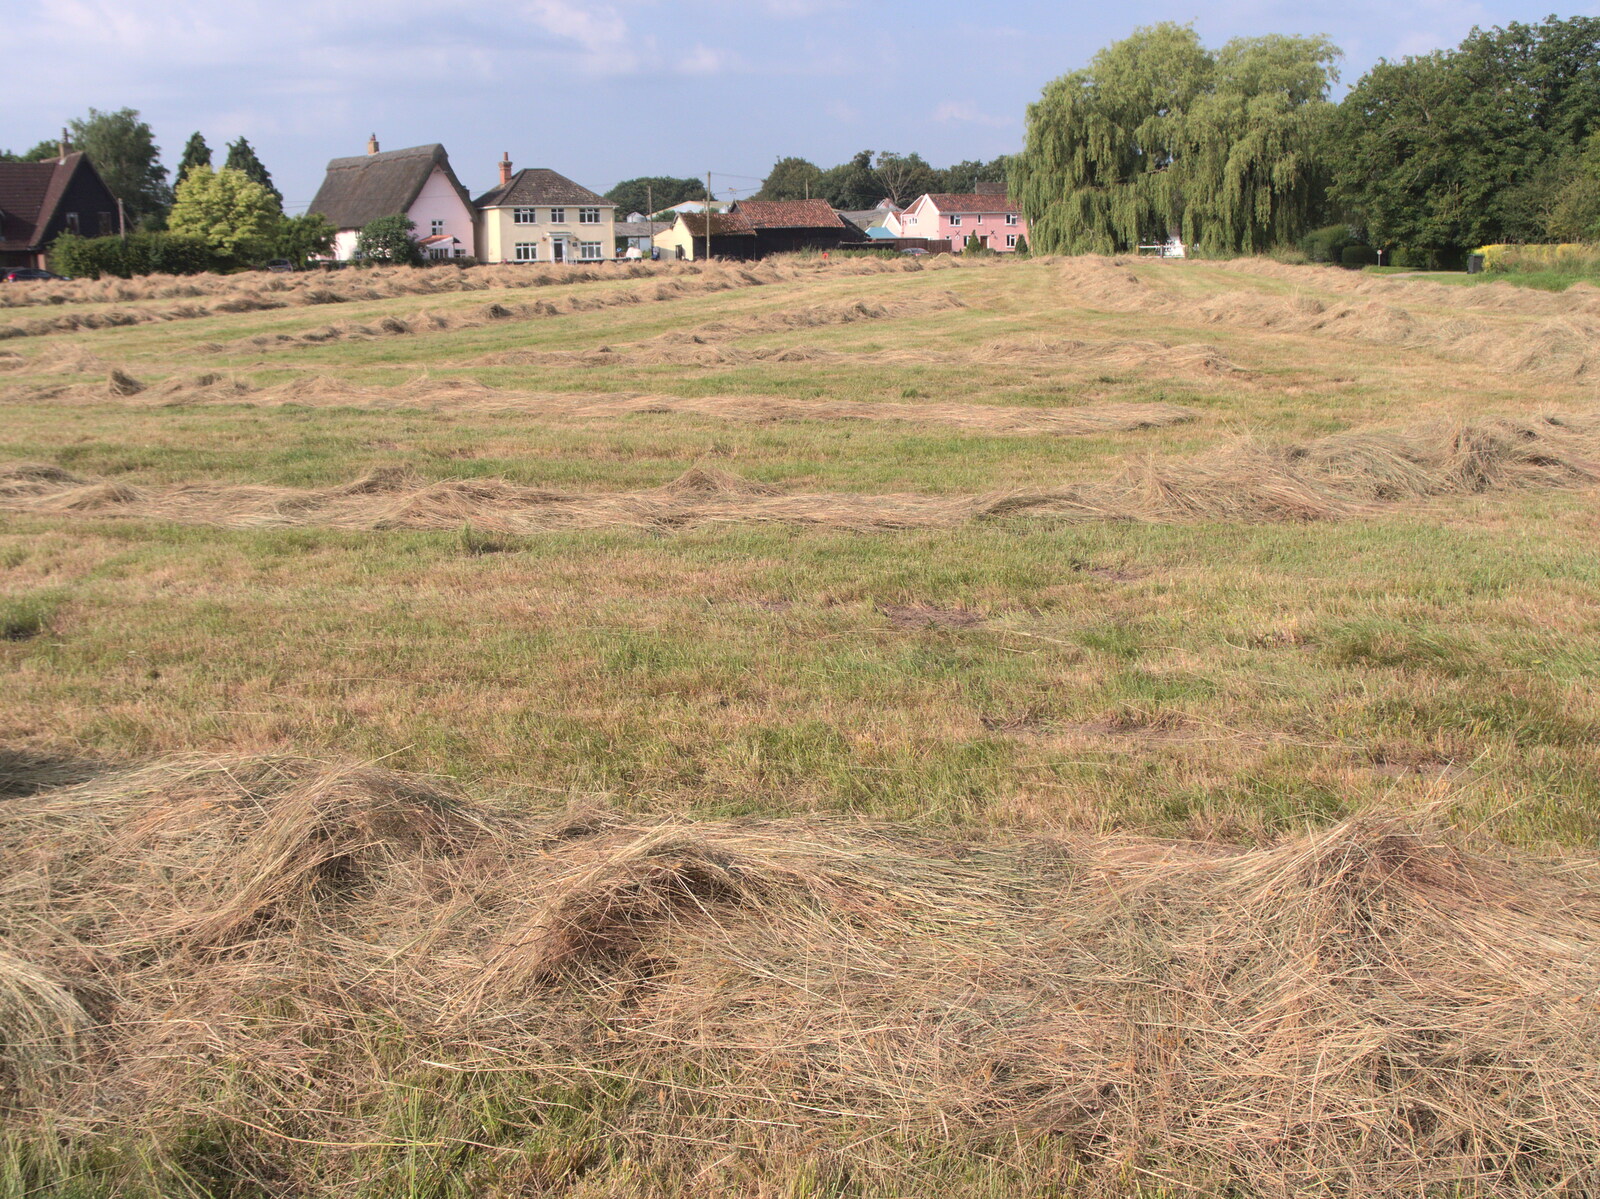 The hay has been cut on Thrandeston Little Green from The BSCC at The Crown, Gissing, Norfolk - 22nd July 2021